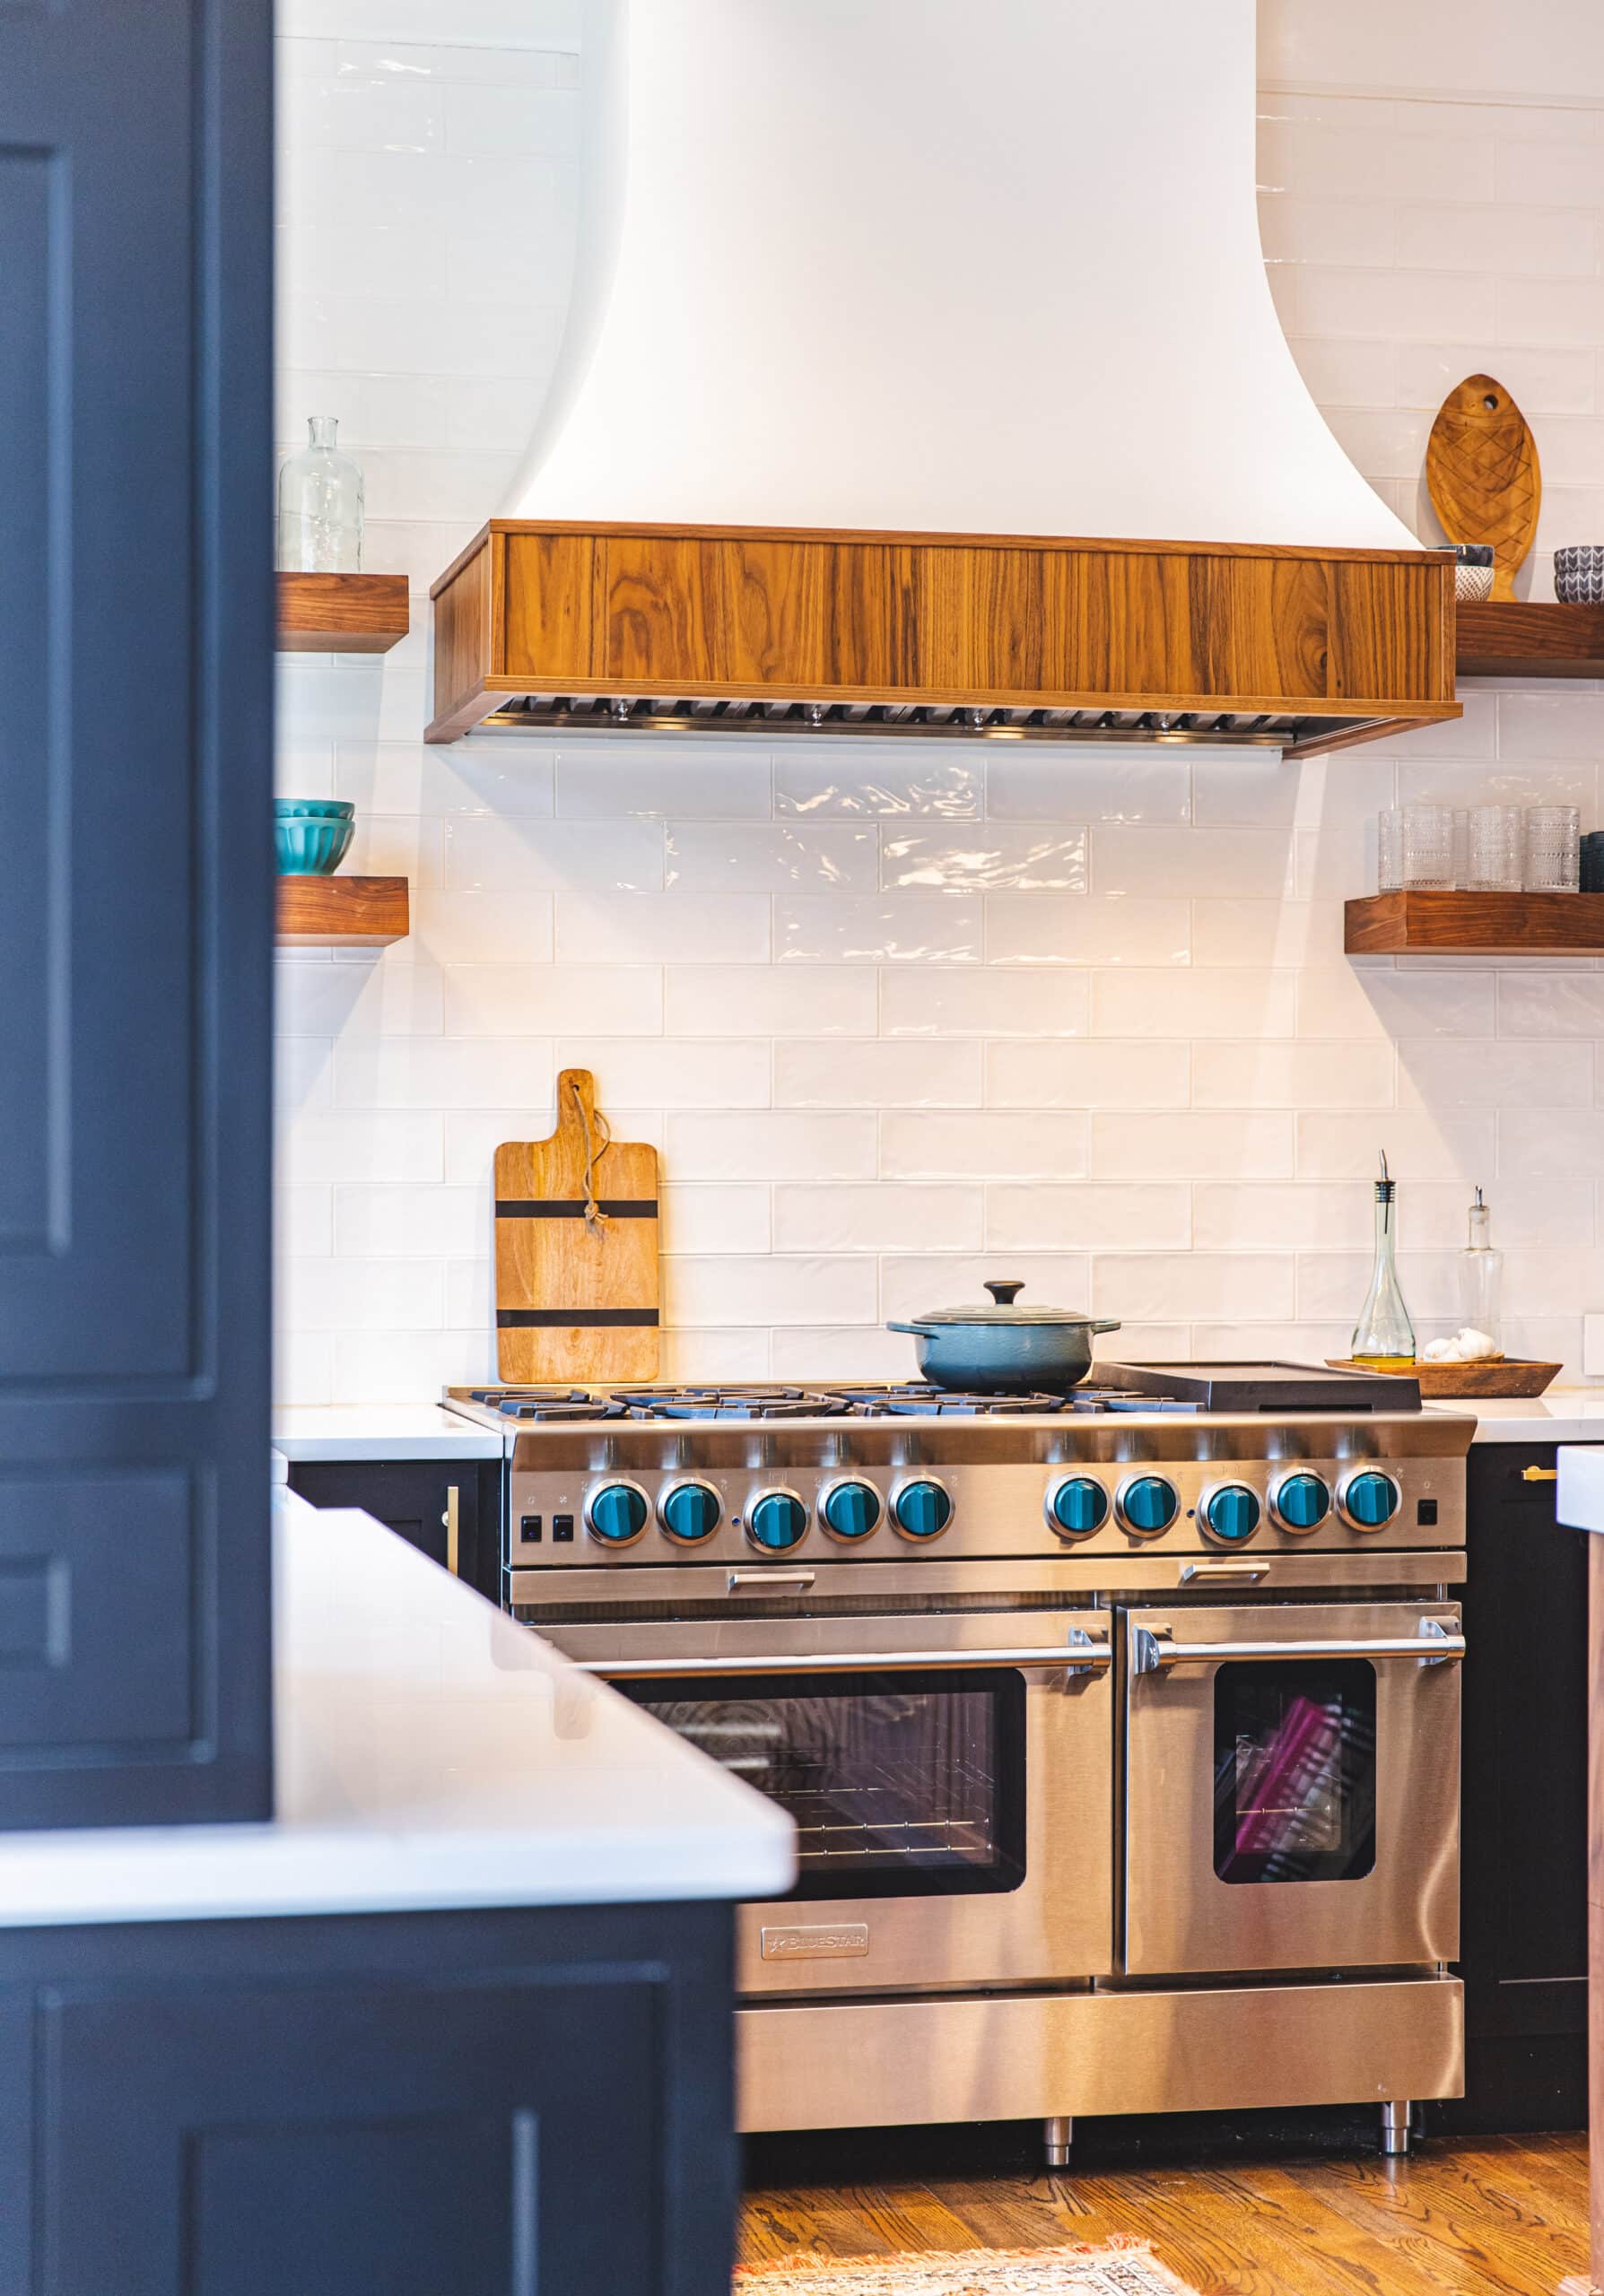 A well-equipped kitchen with a stove, oven, and cabinets